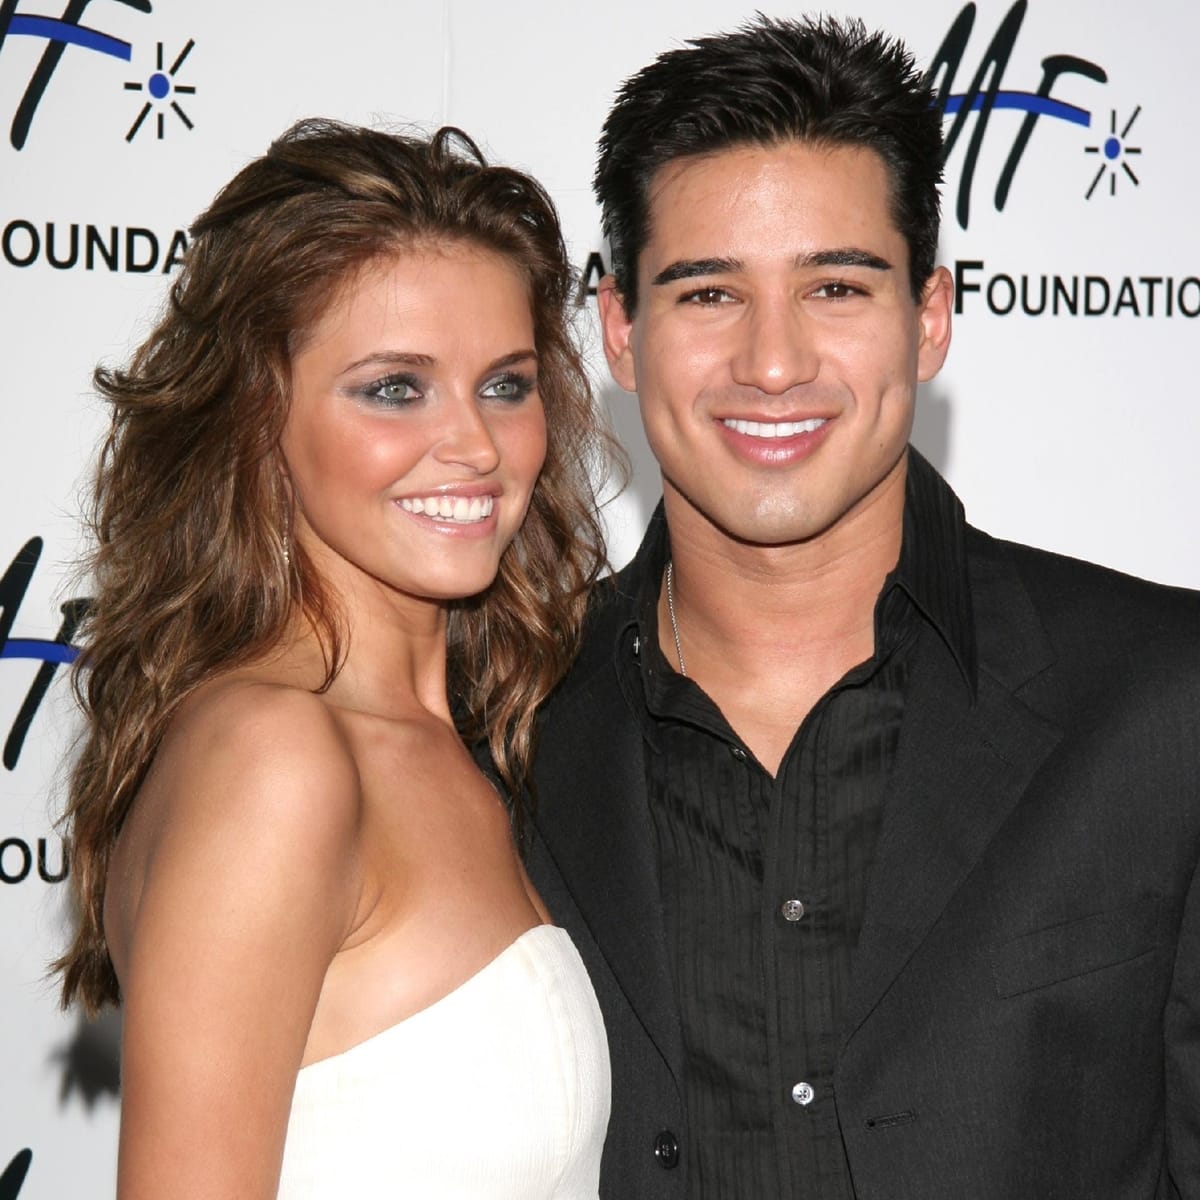 Heidi Mueller and Mario Lopez dated for a few months in 2006